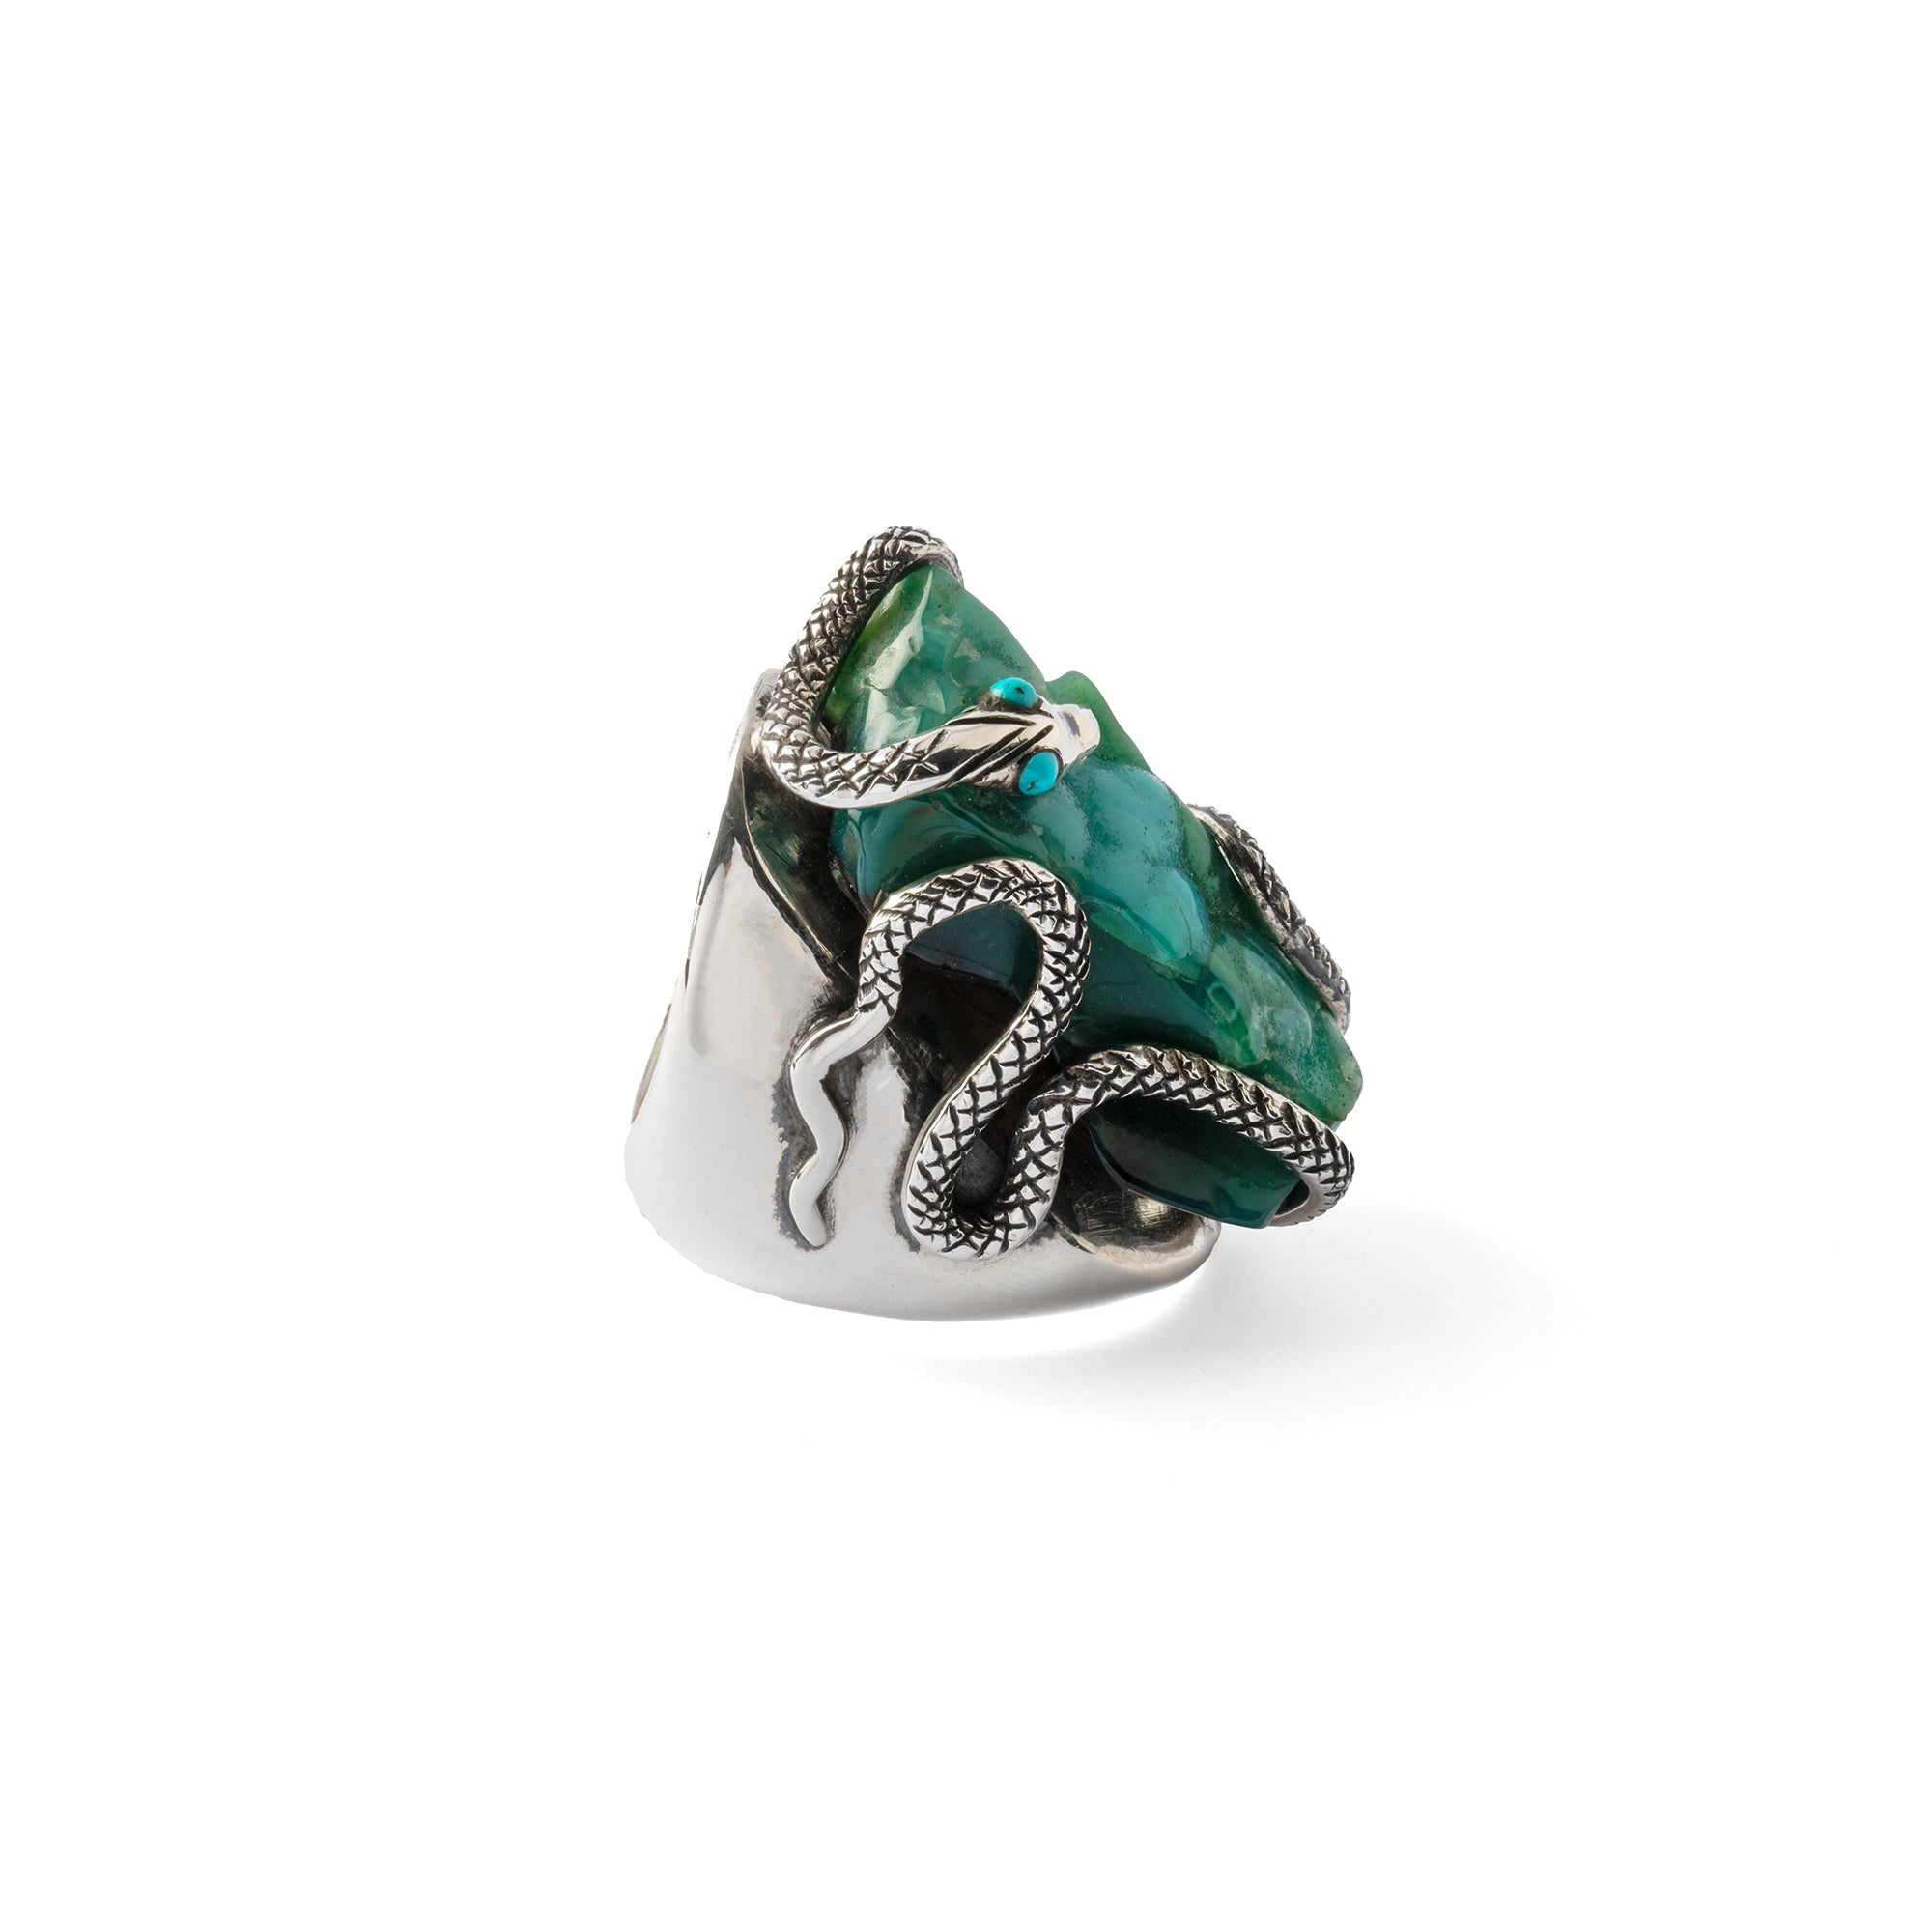 Hallmarked Silver Snake Ring with Chrysocolla